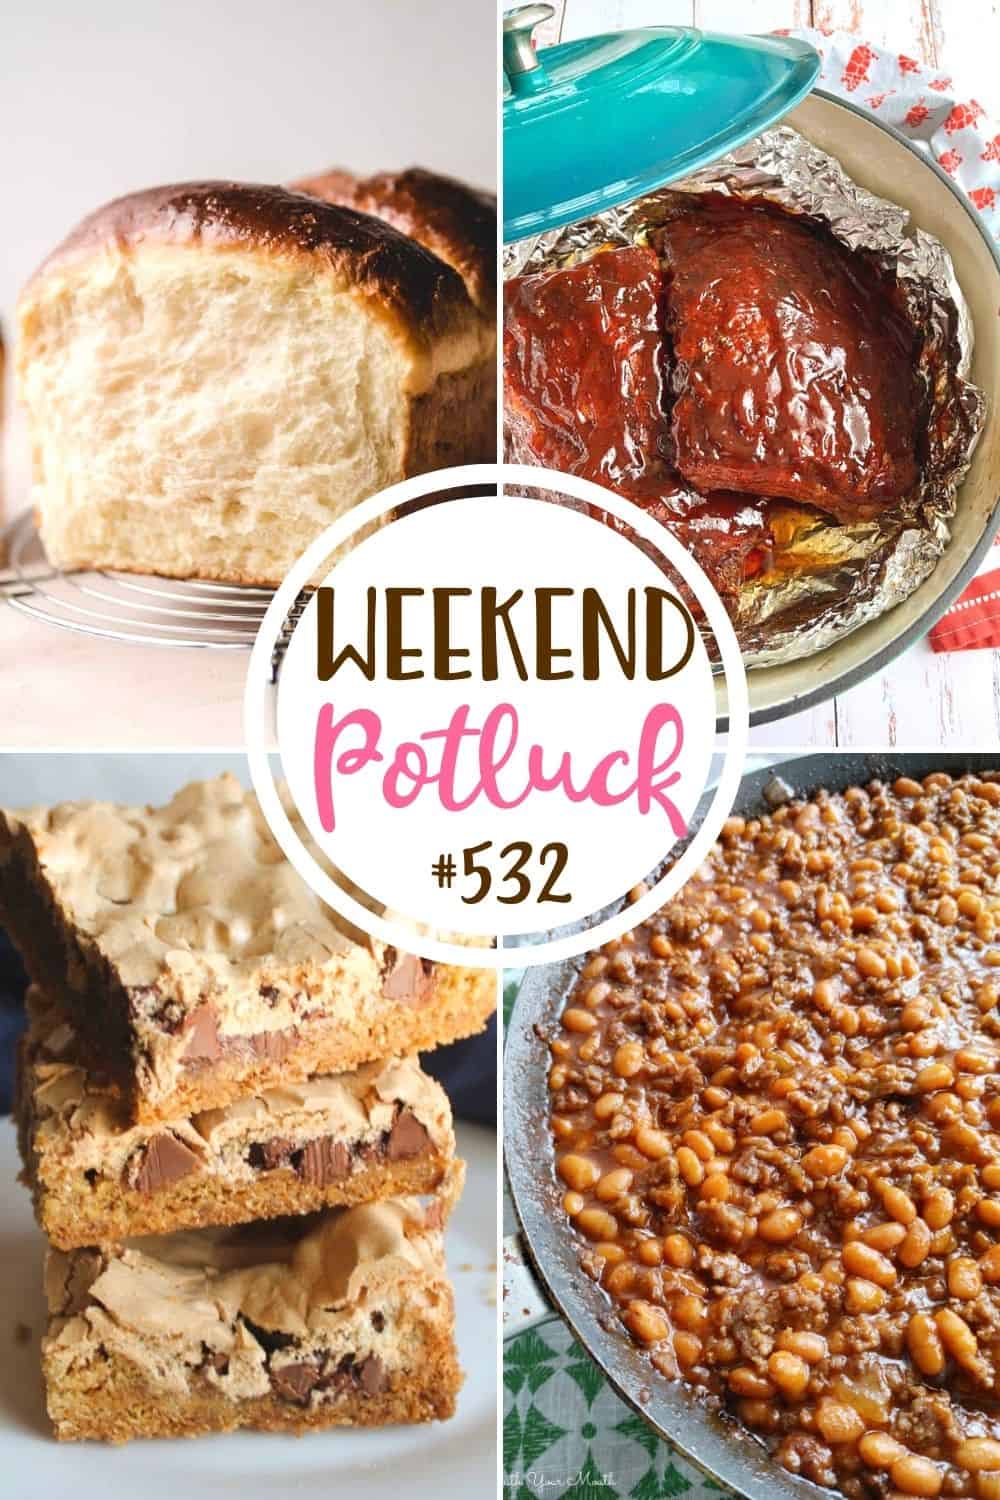 Weekend Potluck featured recipes: Condensed Milk Bread, Dutch Oven Ribs, Paula's Mud Hen Bars and Cowboy Beans.